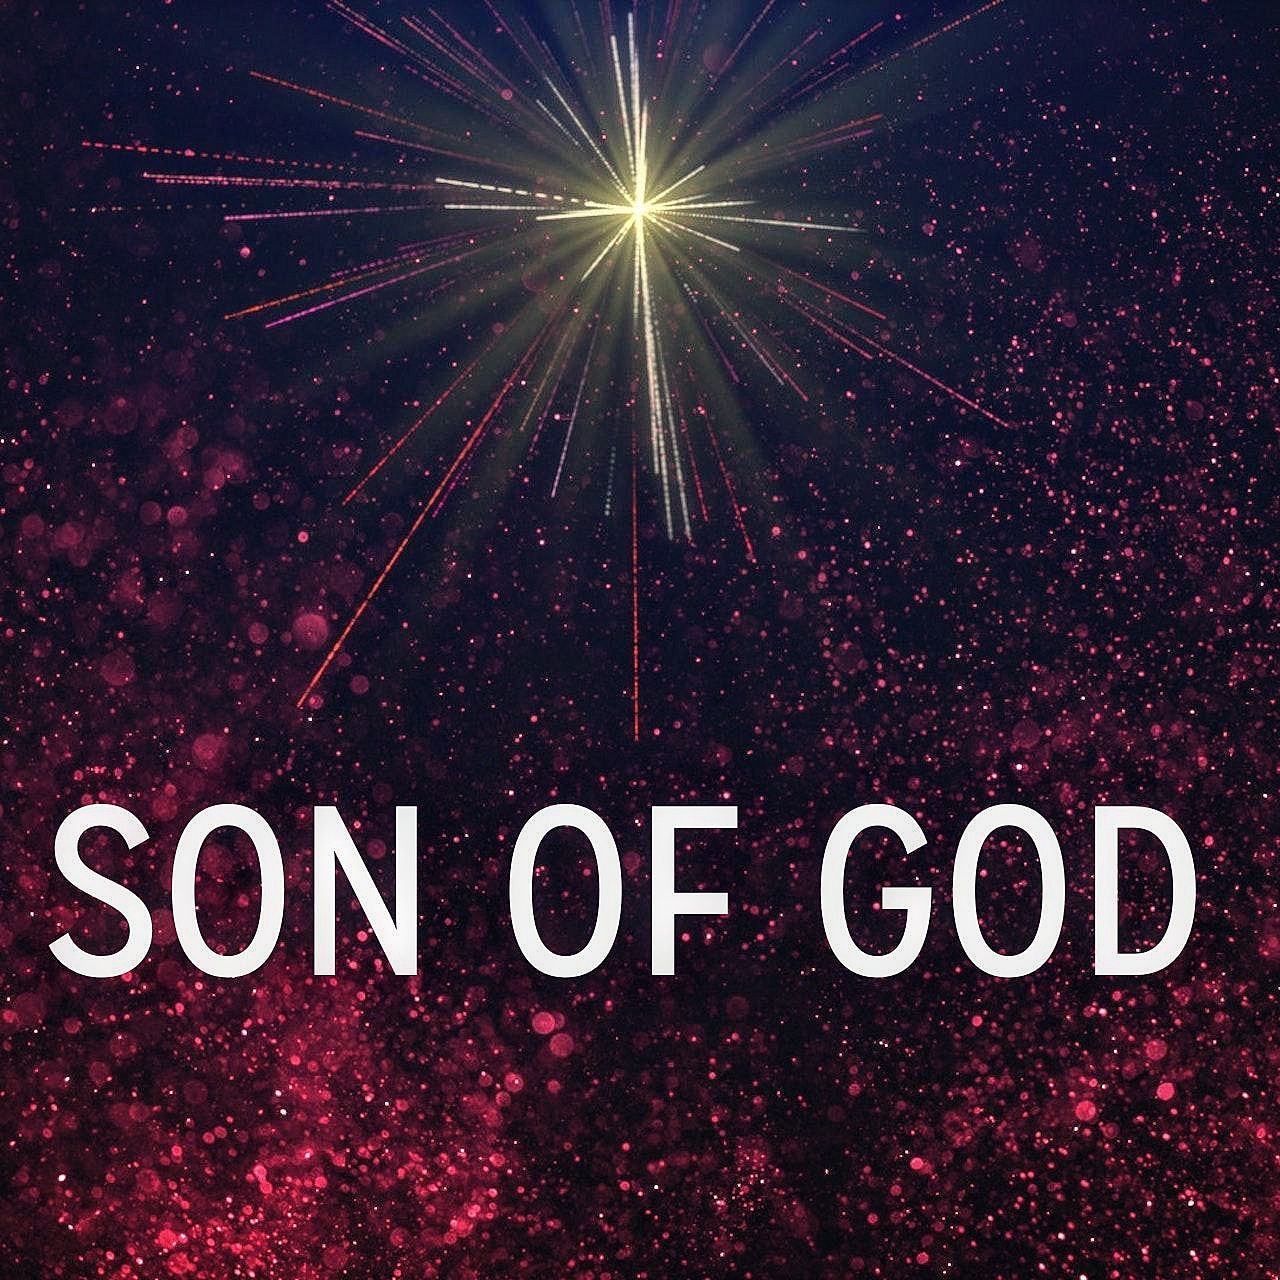 And His Name Shall Be Called: Son of God